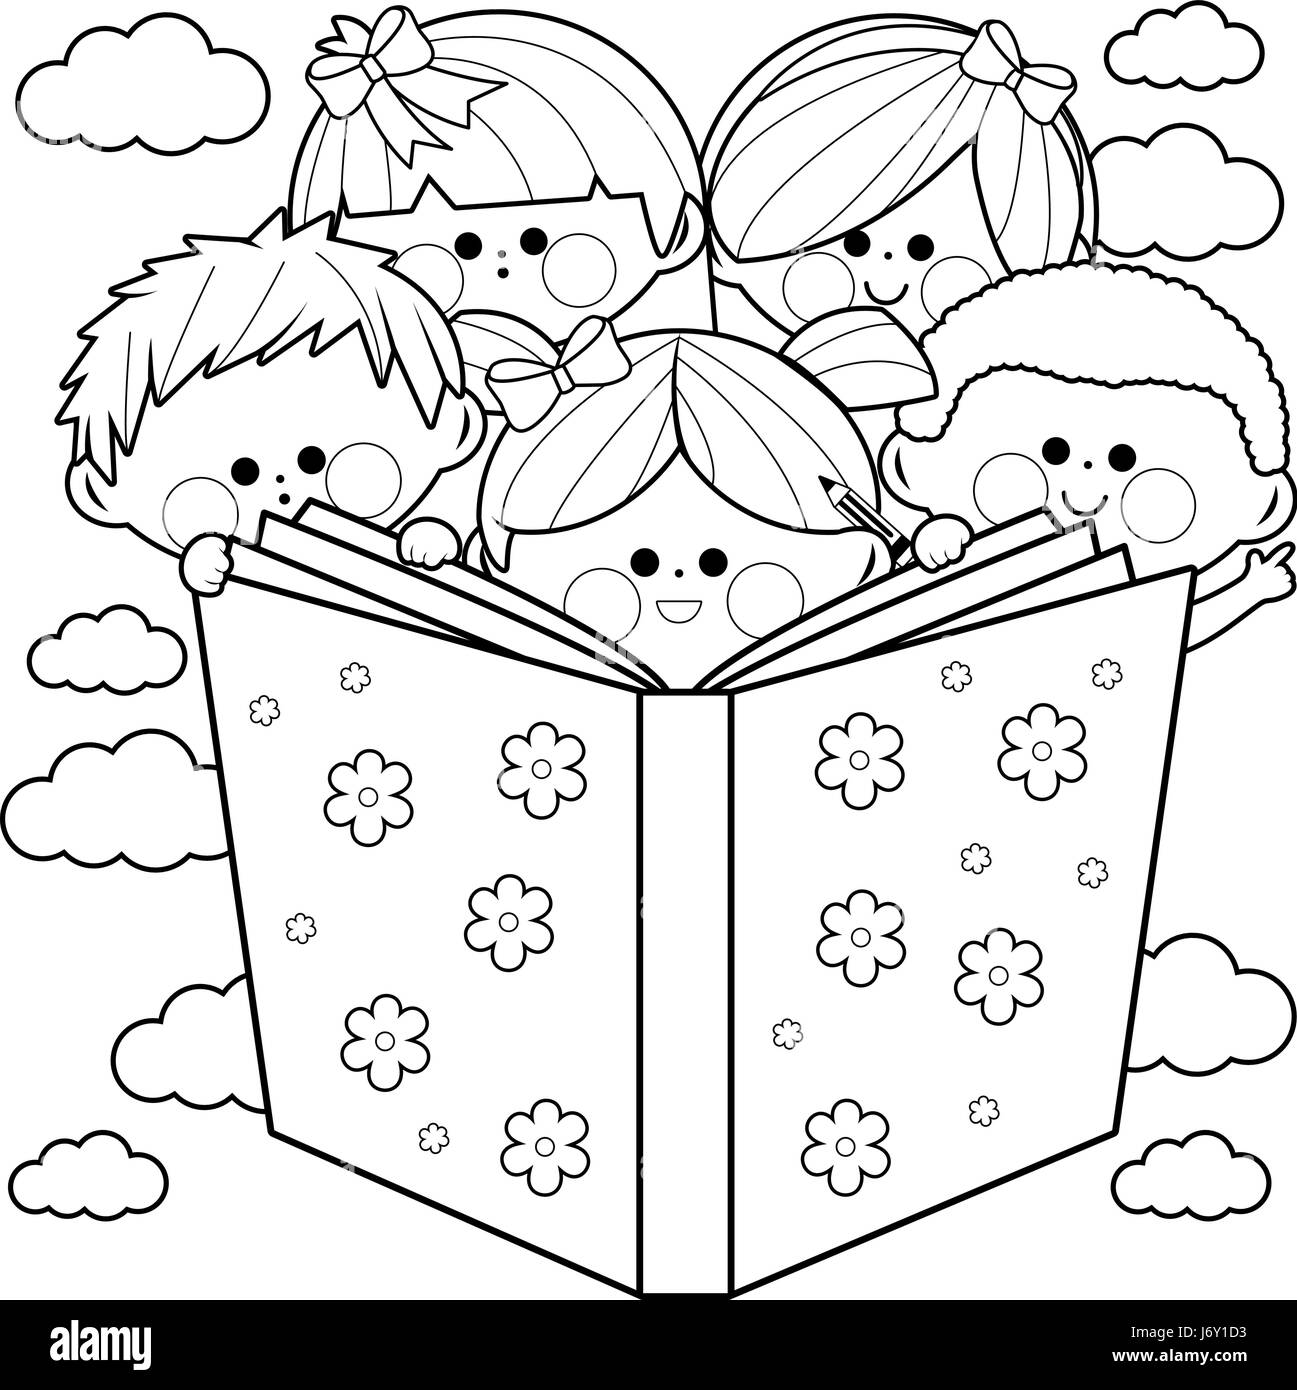 Group of kids reading a book coloring book page